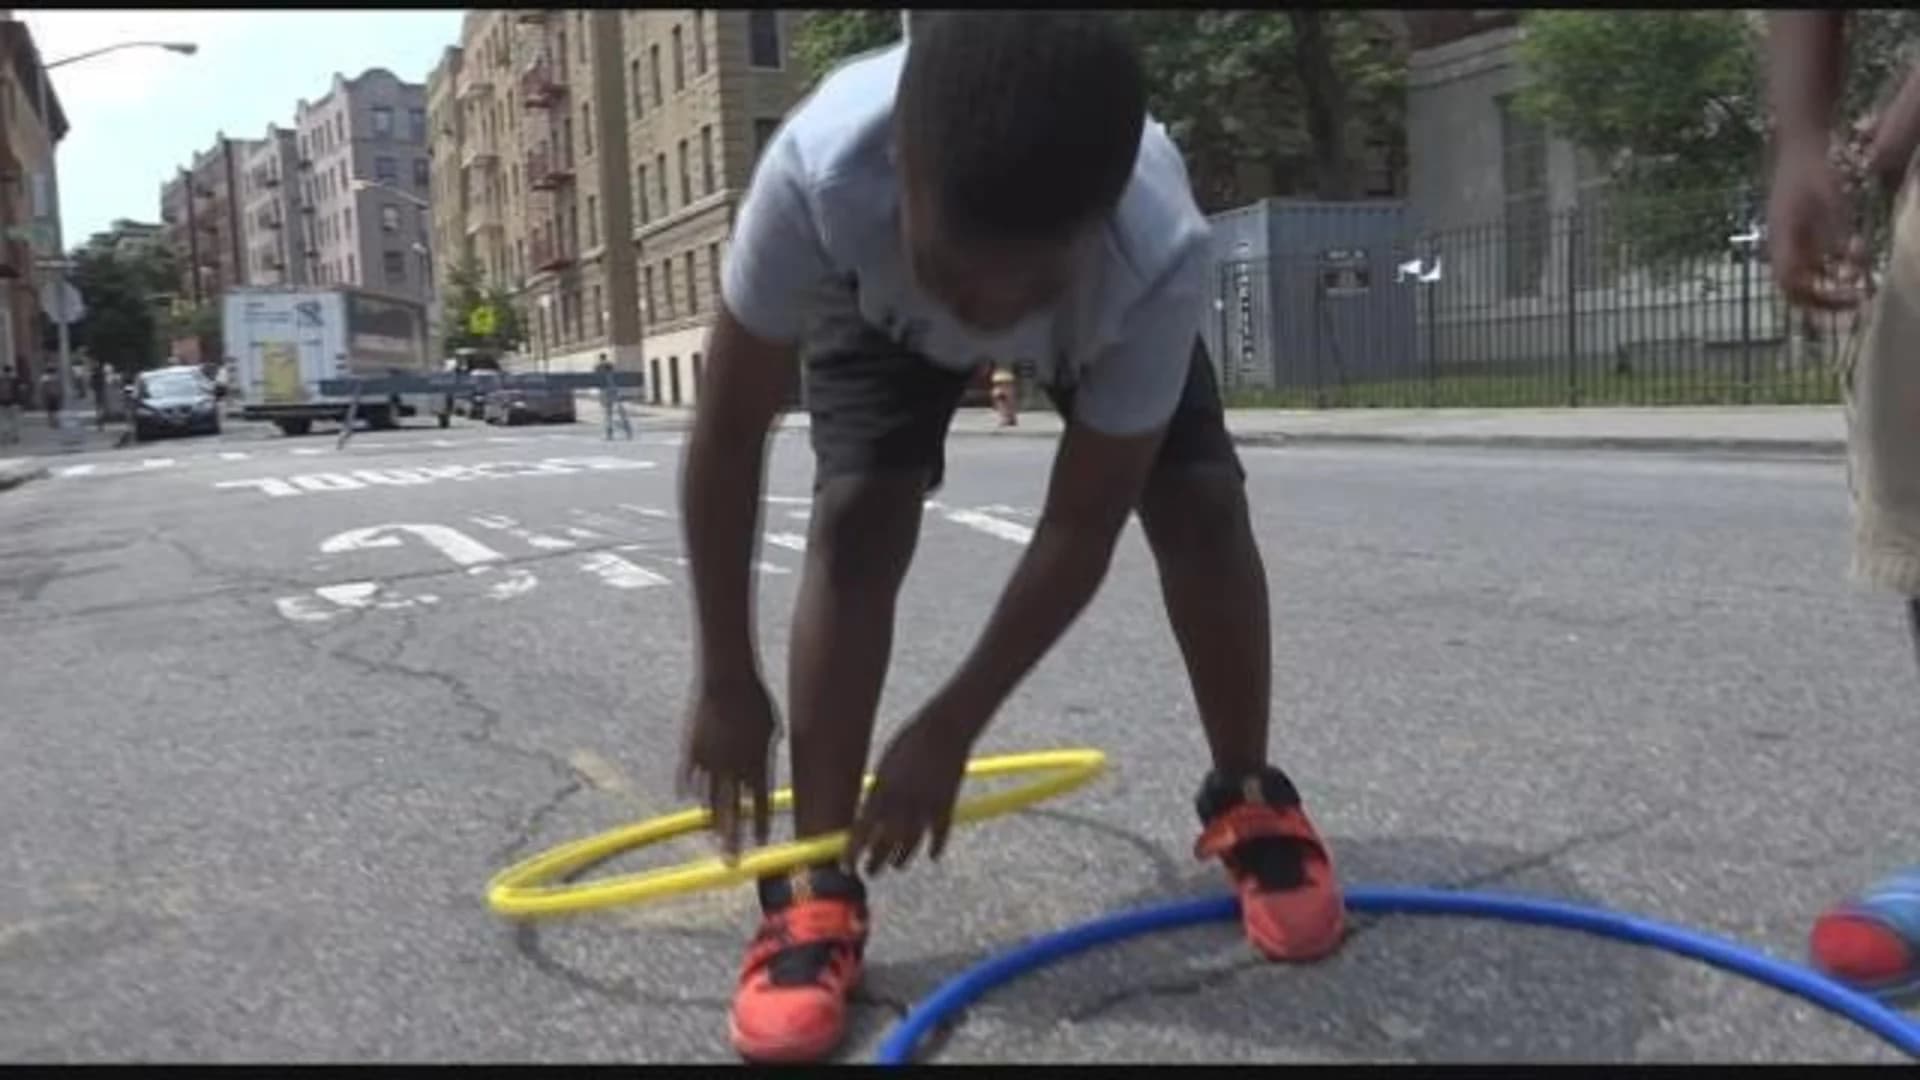 Fordham Playstreet reopens to children for summer